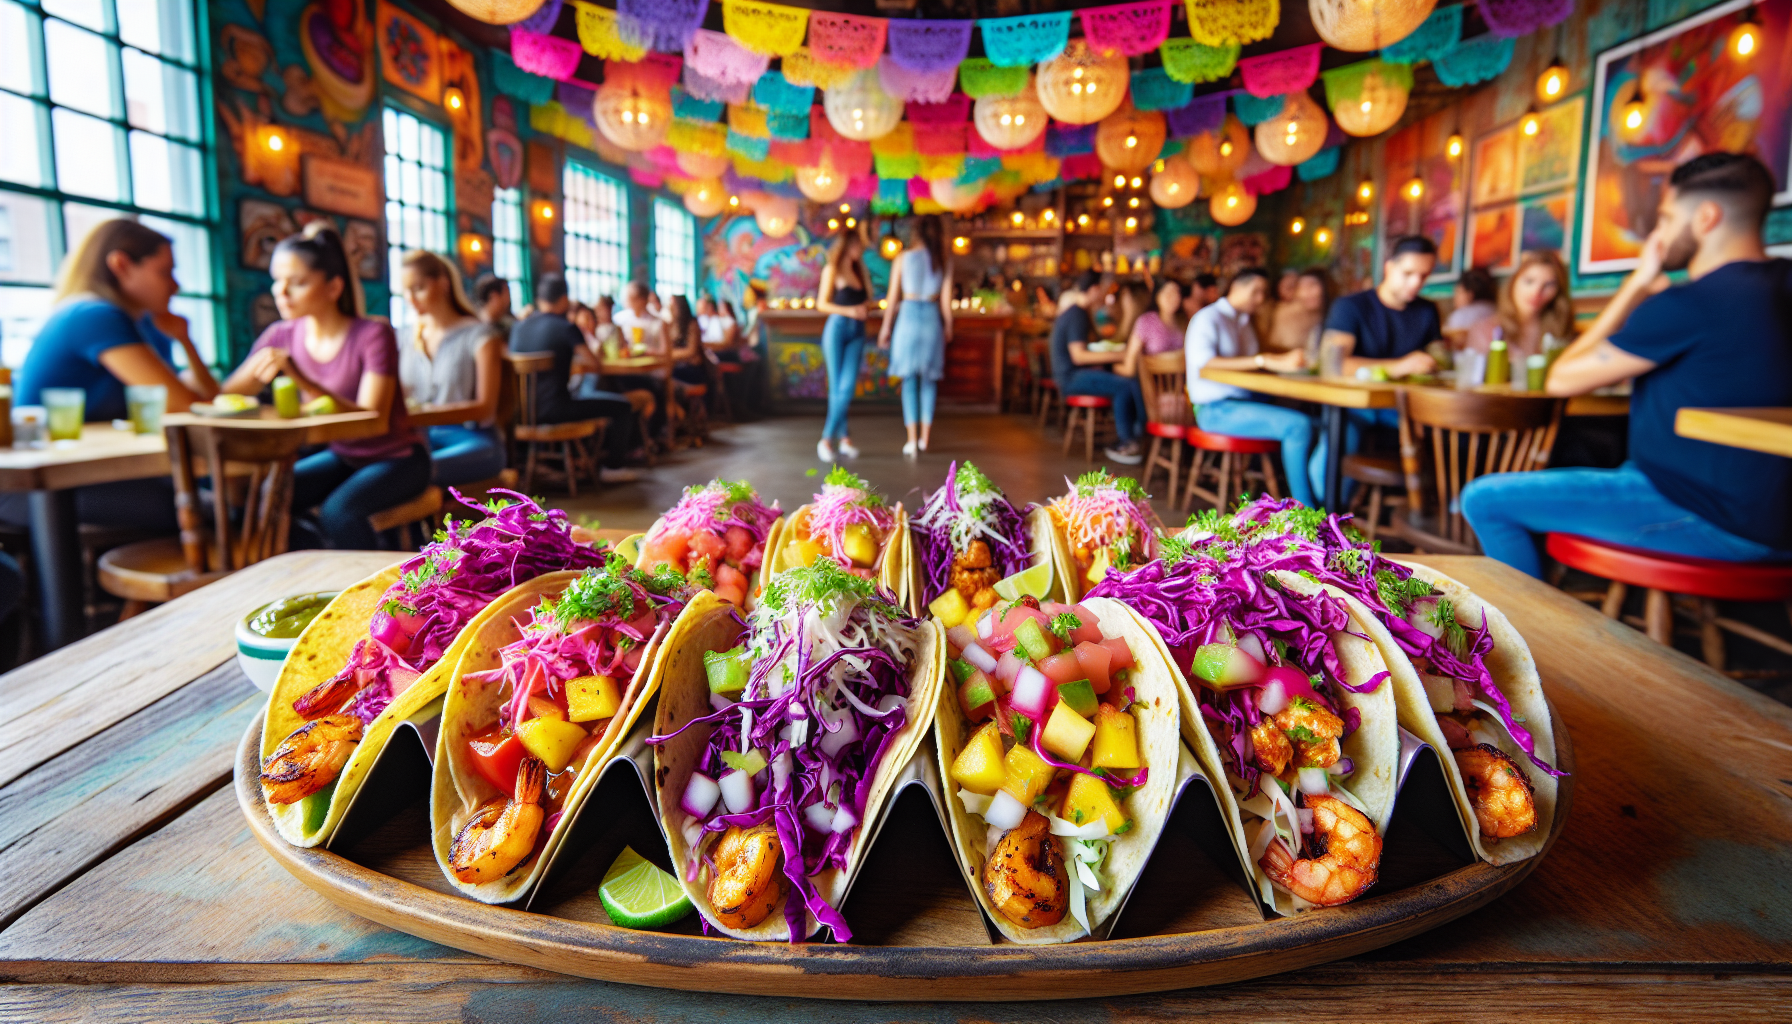 Creative and colorful taco creations at Tacocraft Taqueria & Tequila Bar